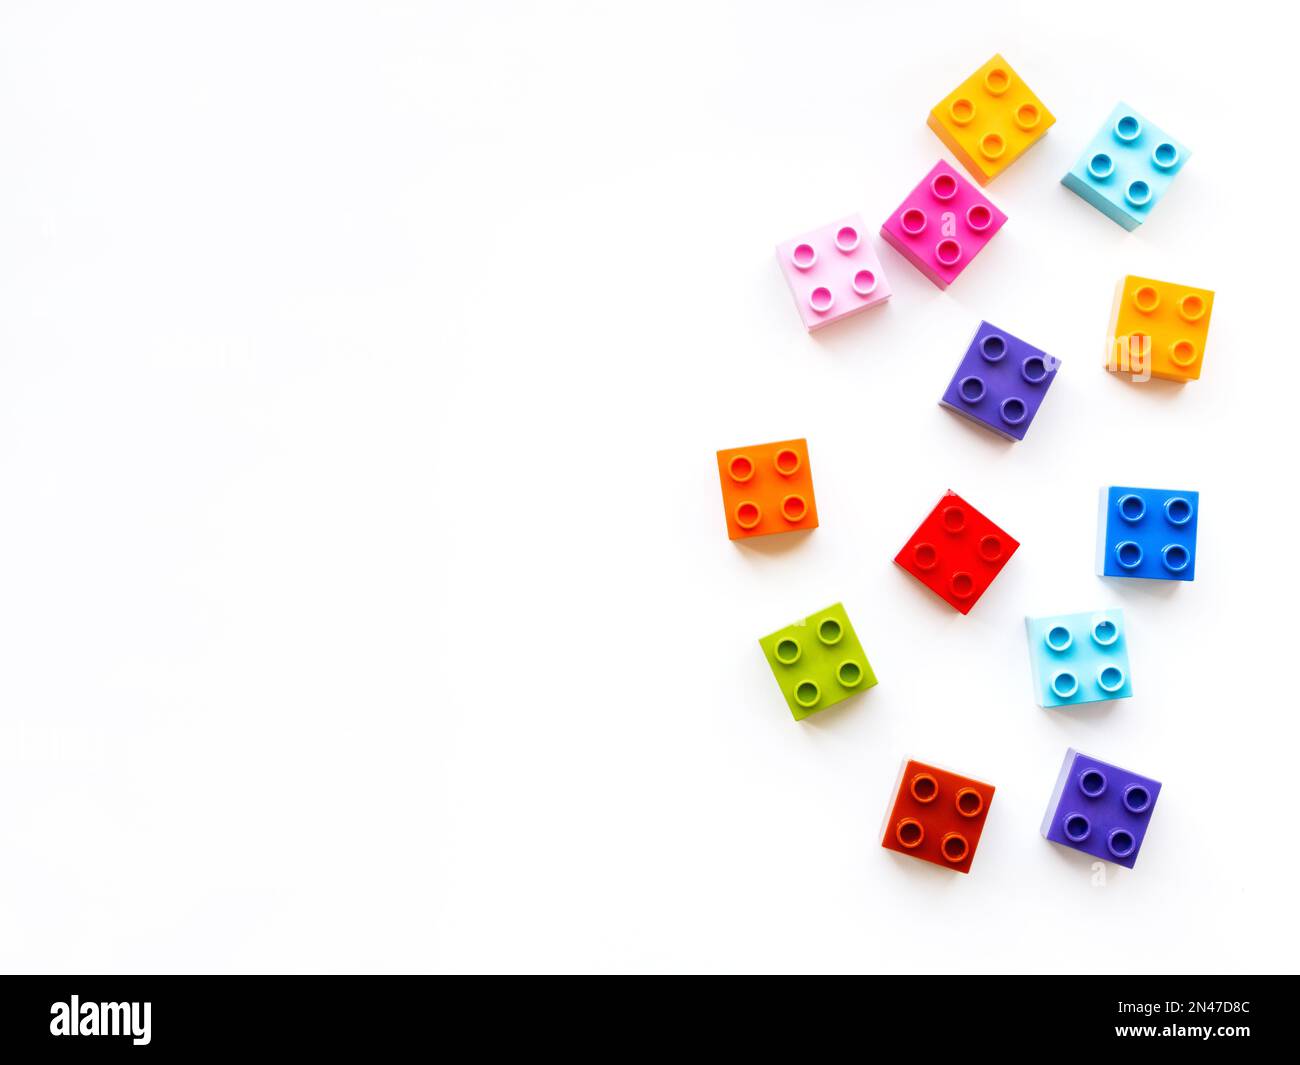 Colorful constructor blocks. Toy bricks without order. Place for text among multicolored toy details. Copy space. Stock Photo